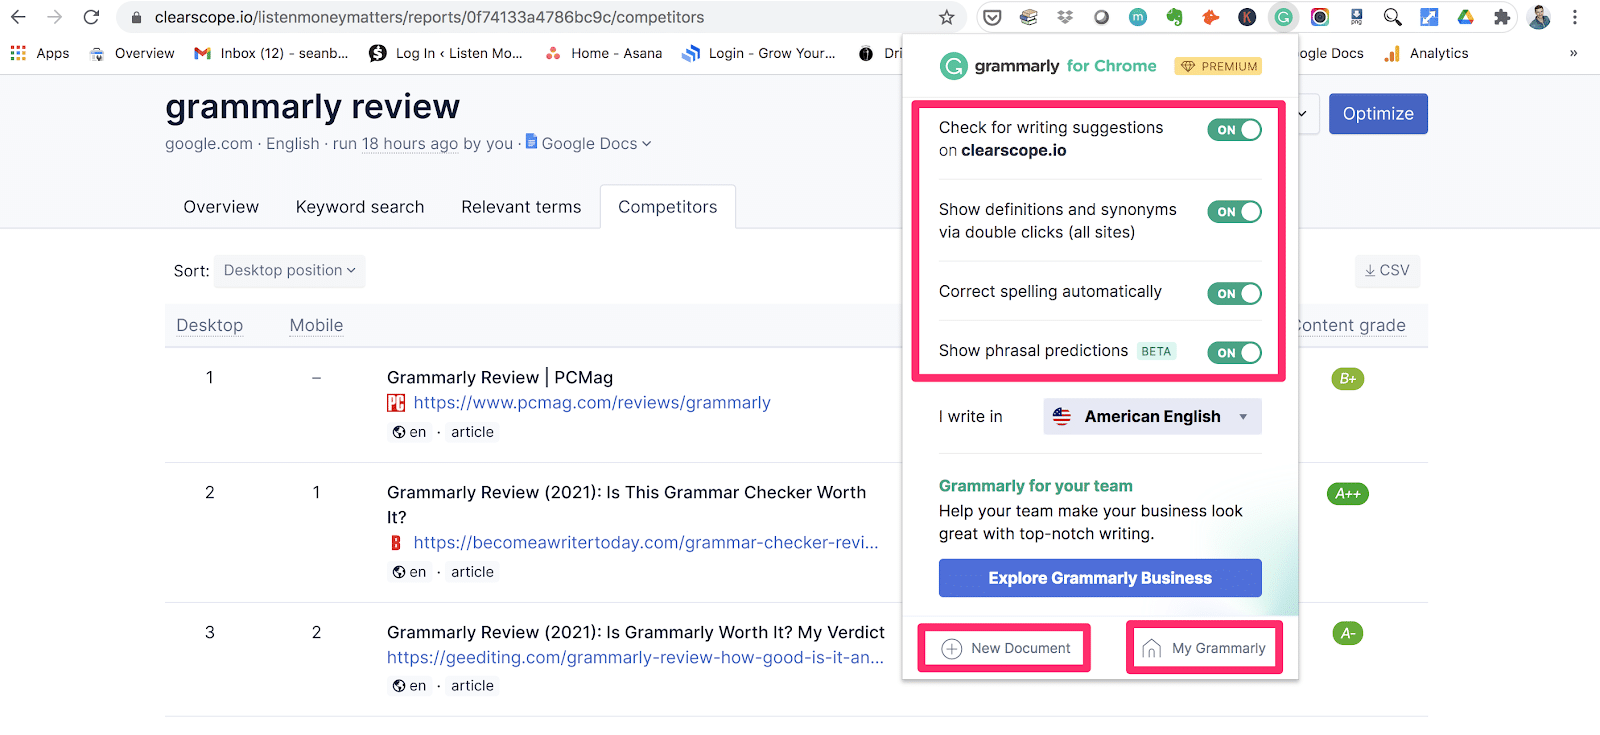 grammarly settings appearing from drop down menu when clicking the g icon in menu bar